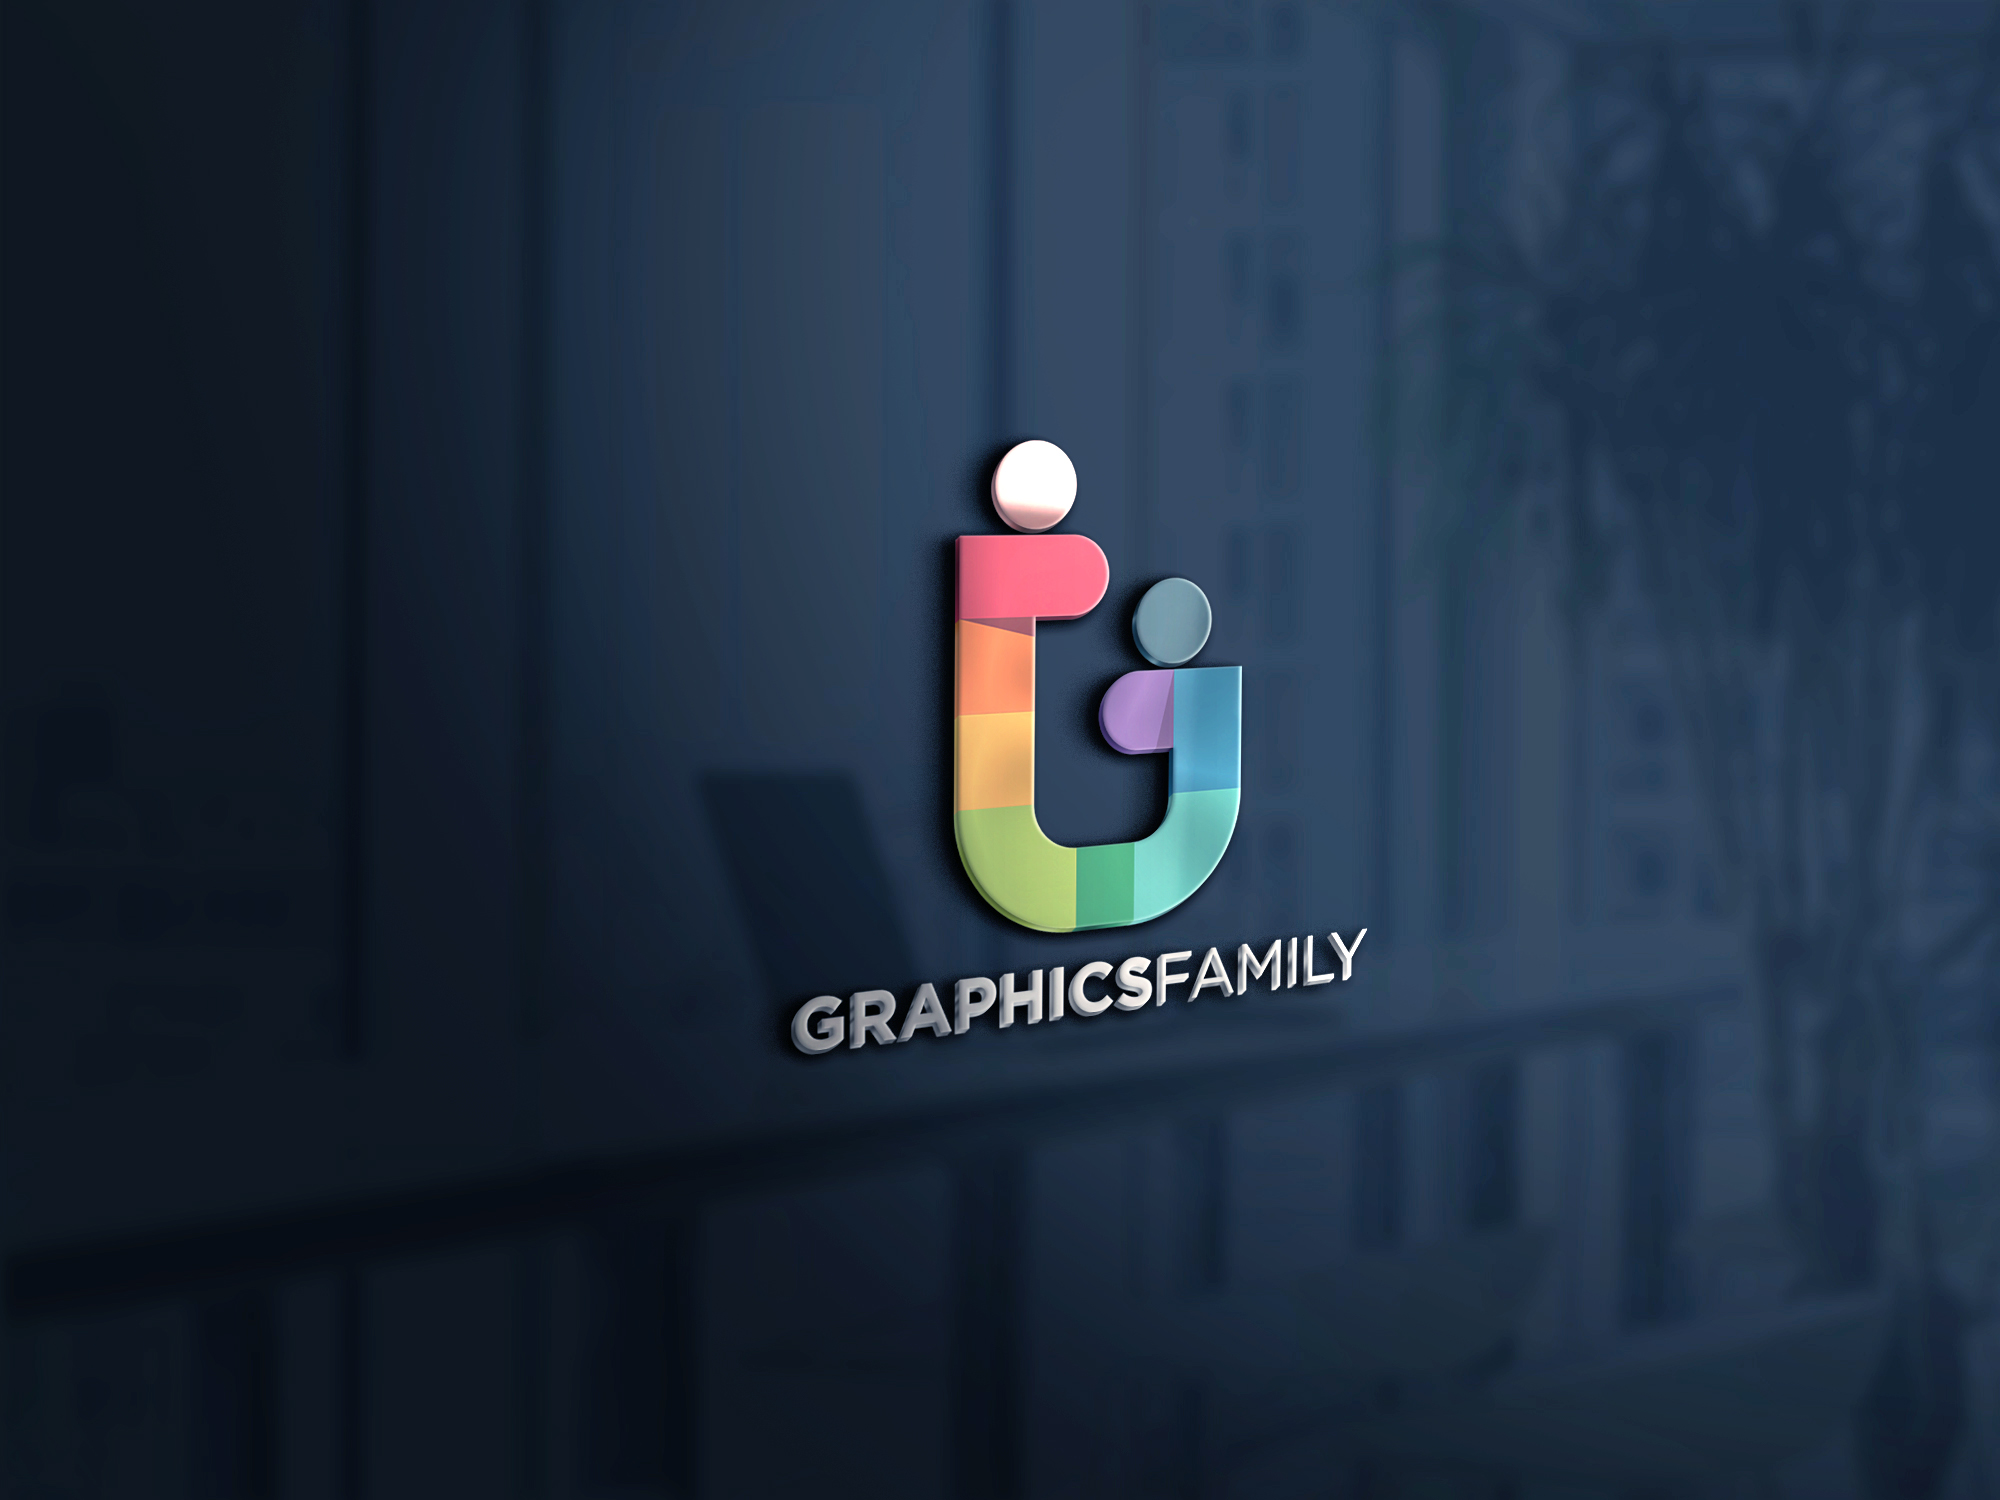 3D Logo Mockup on Glass Wall Download